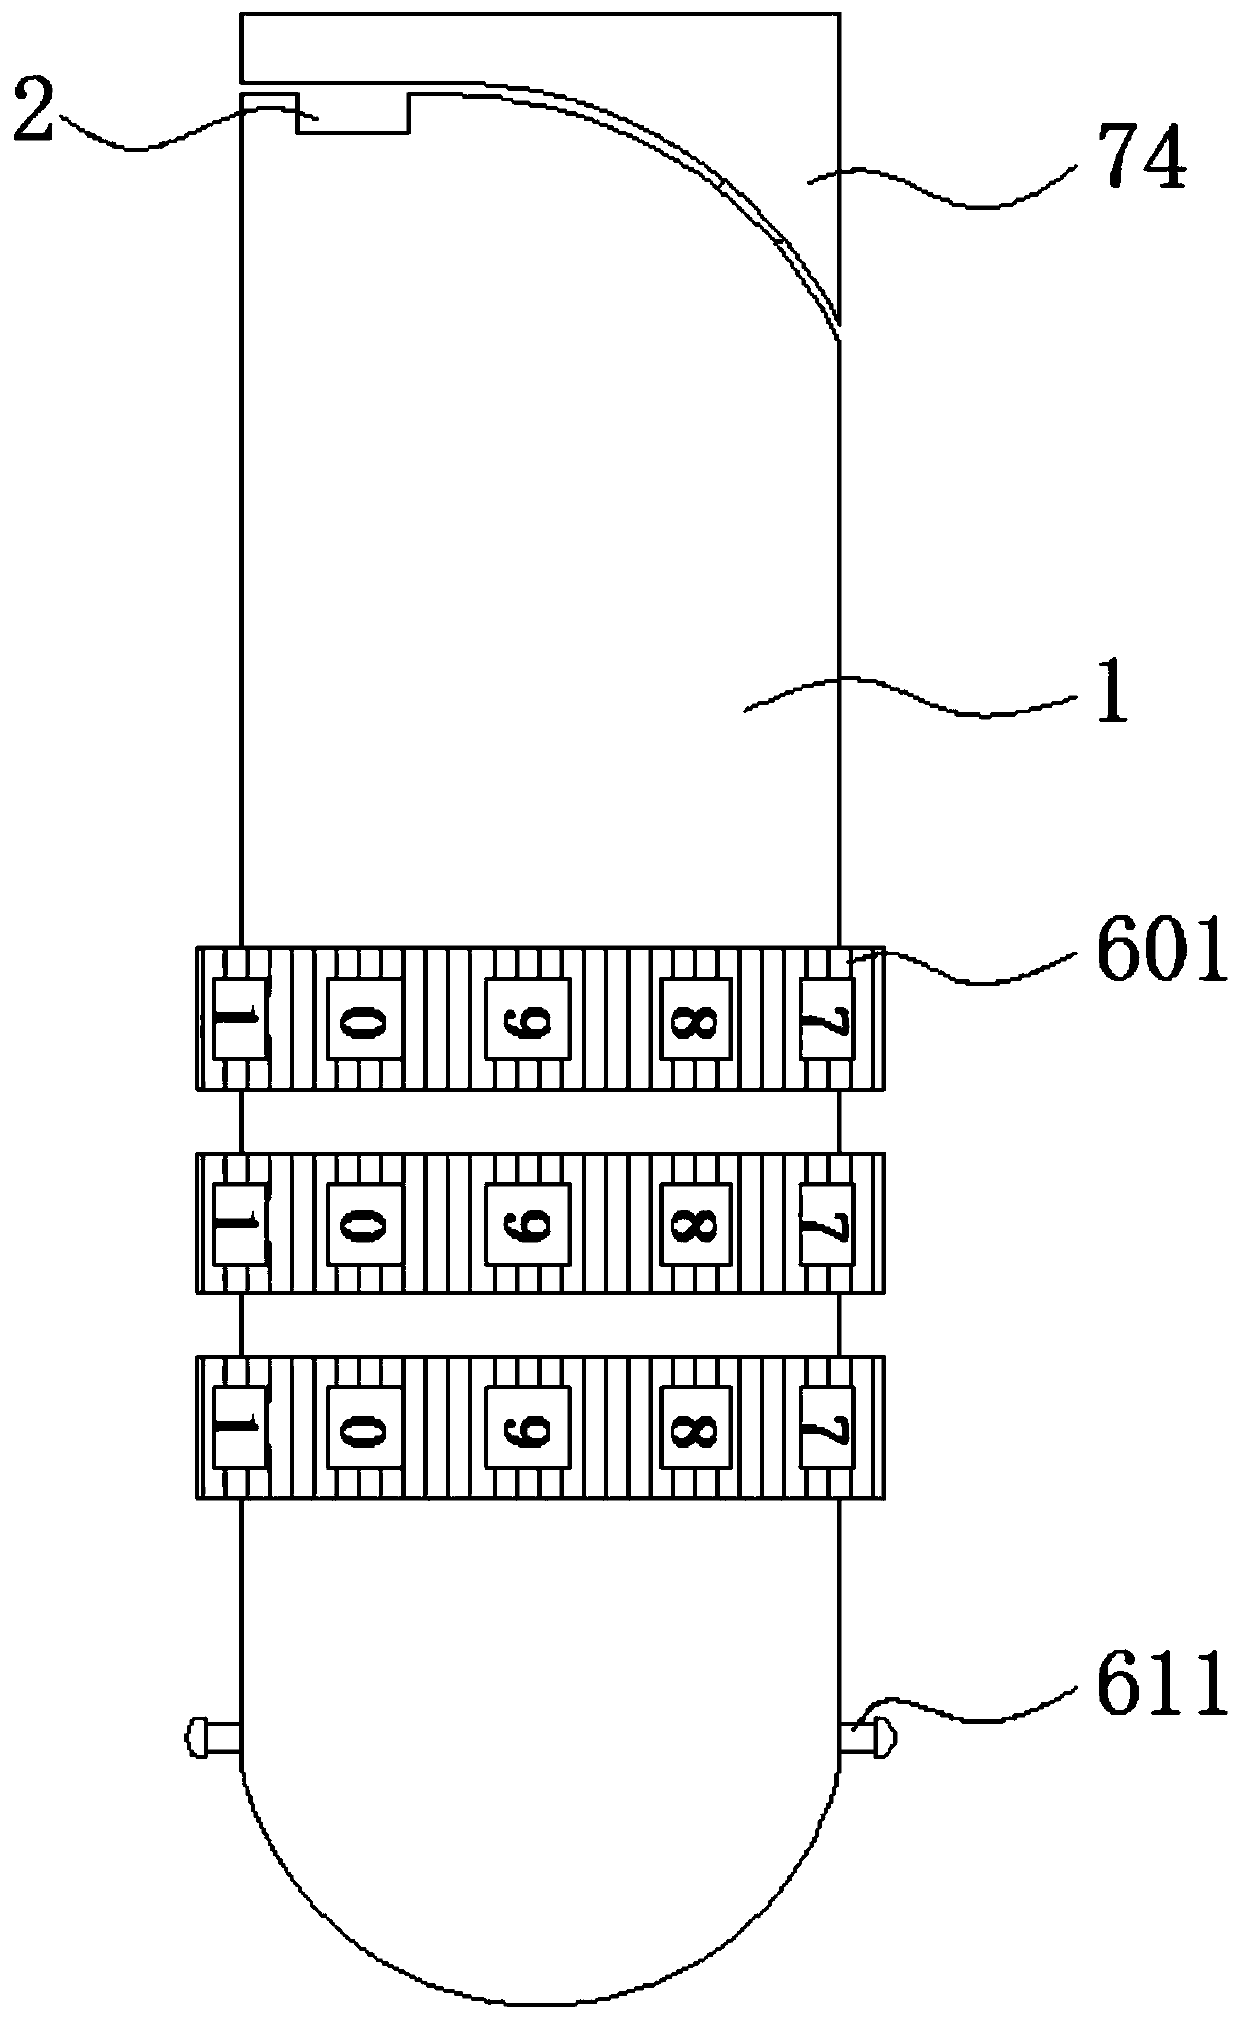 A storage device for information processing